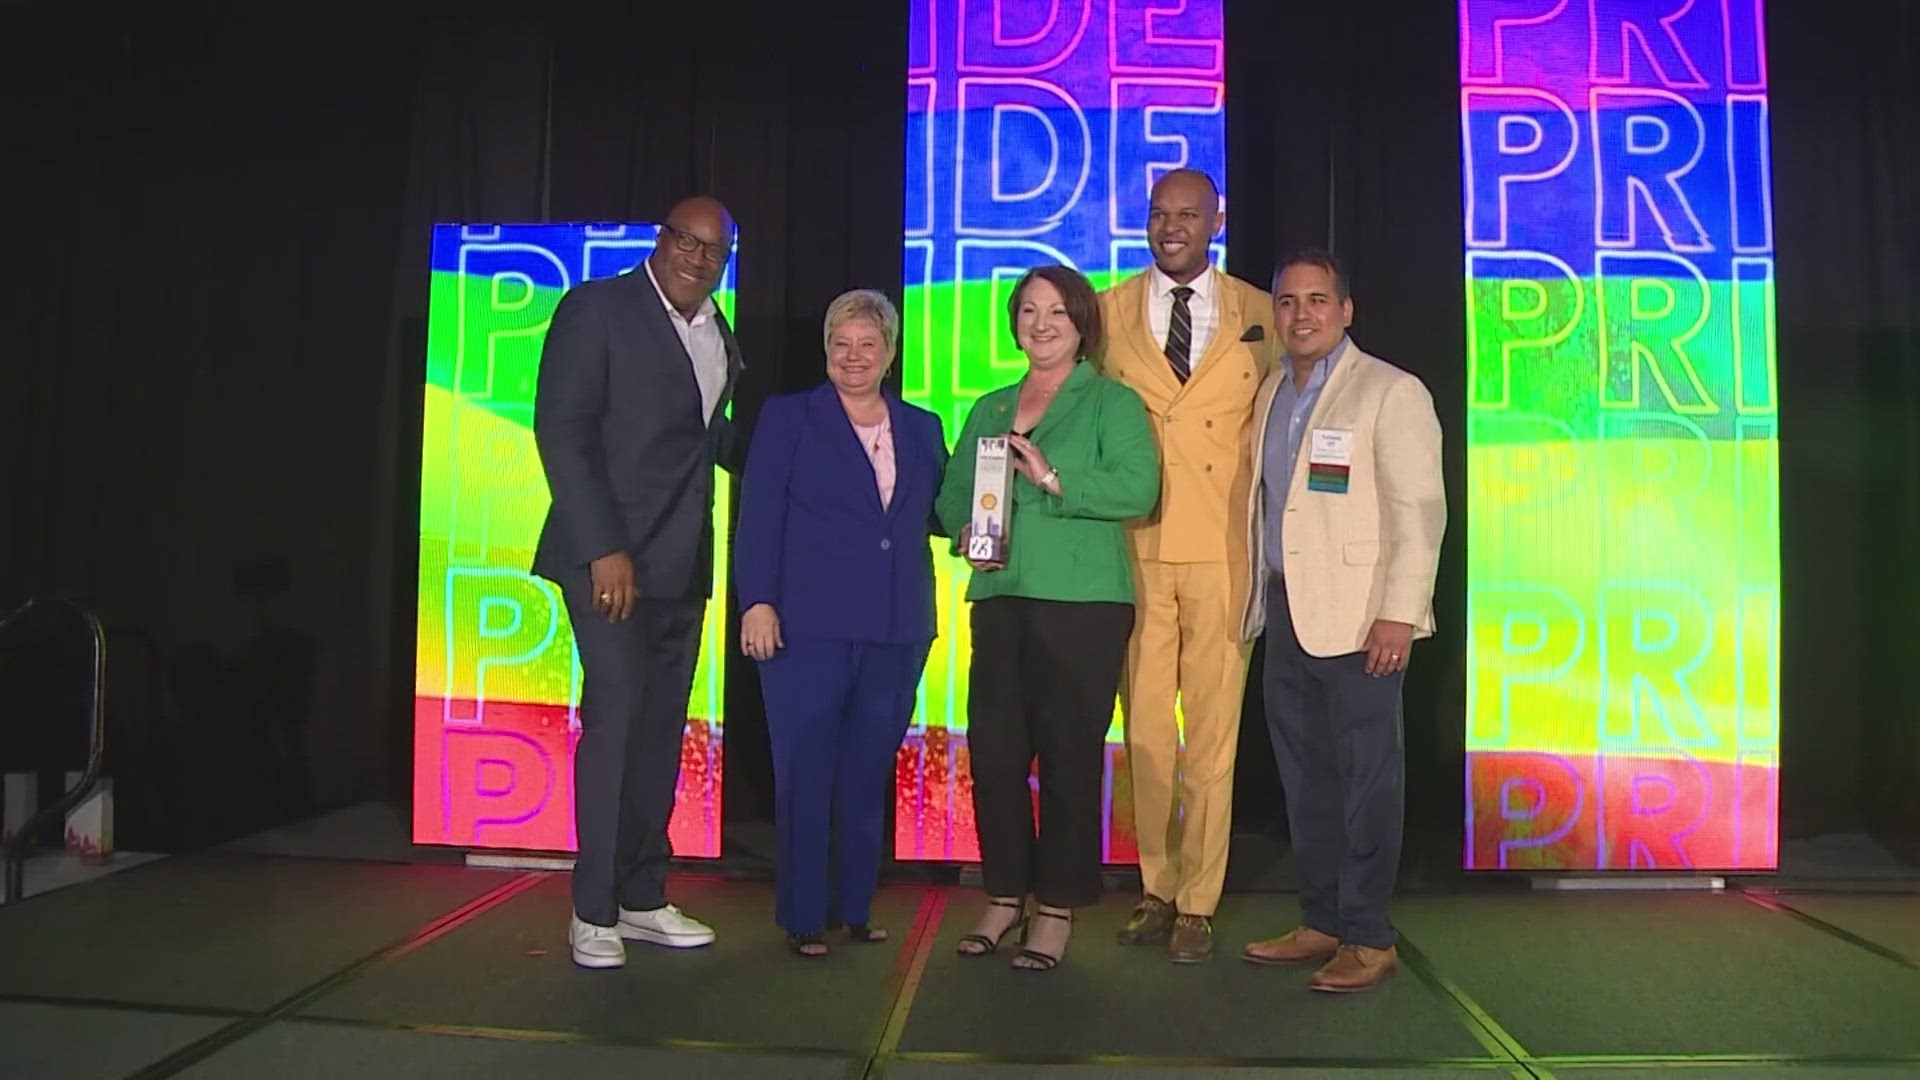 The event recognized the contributions of LGBTQ+ and allied businesses in the Houston area.